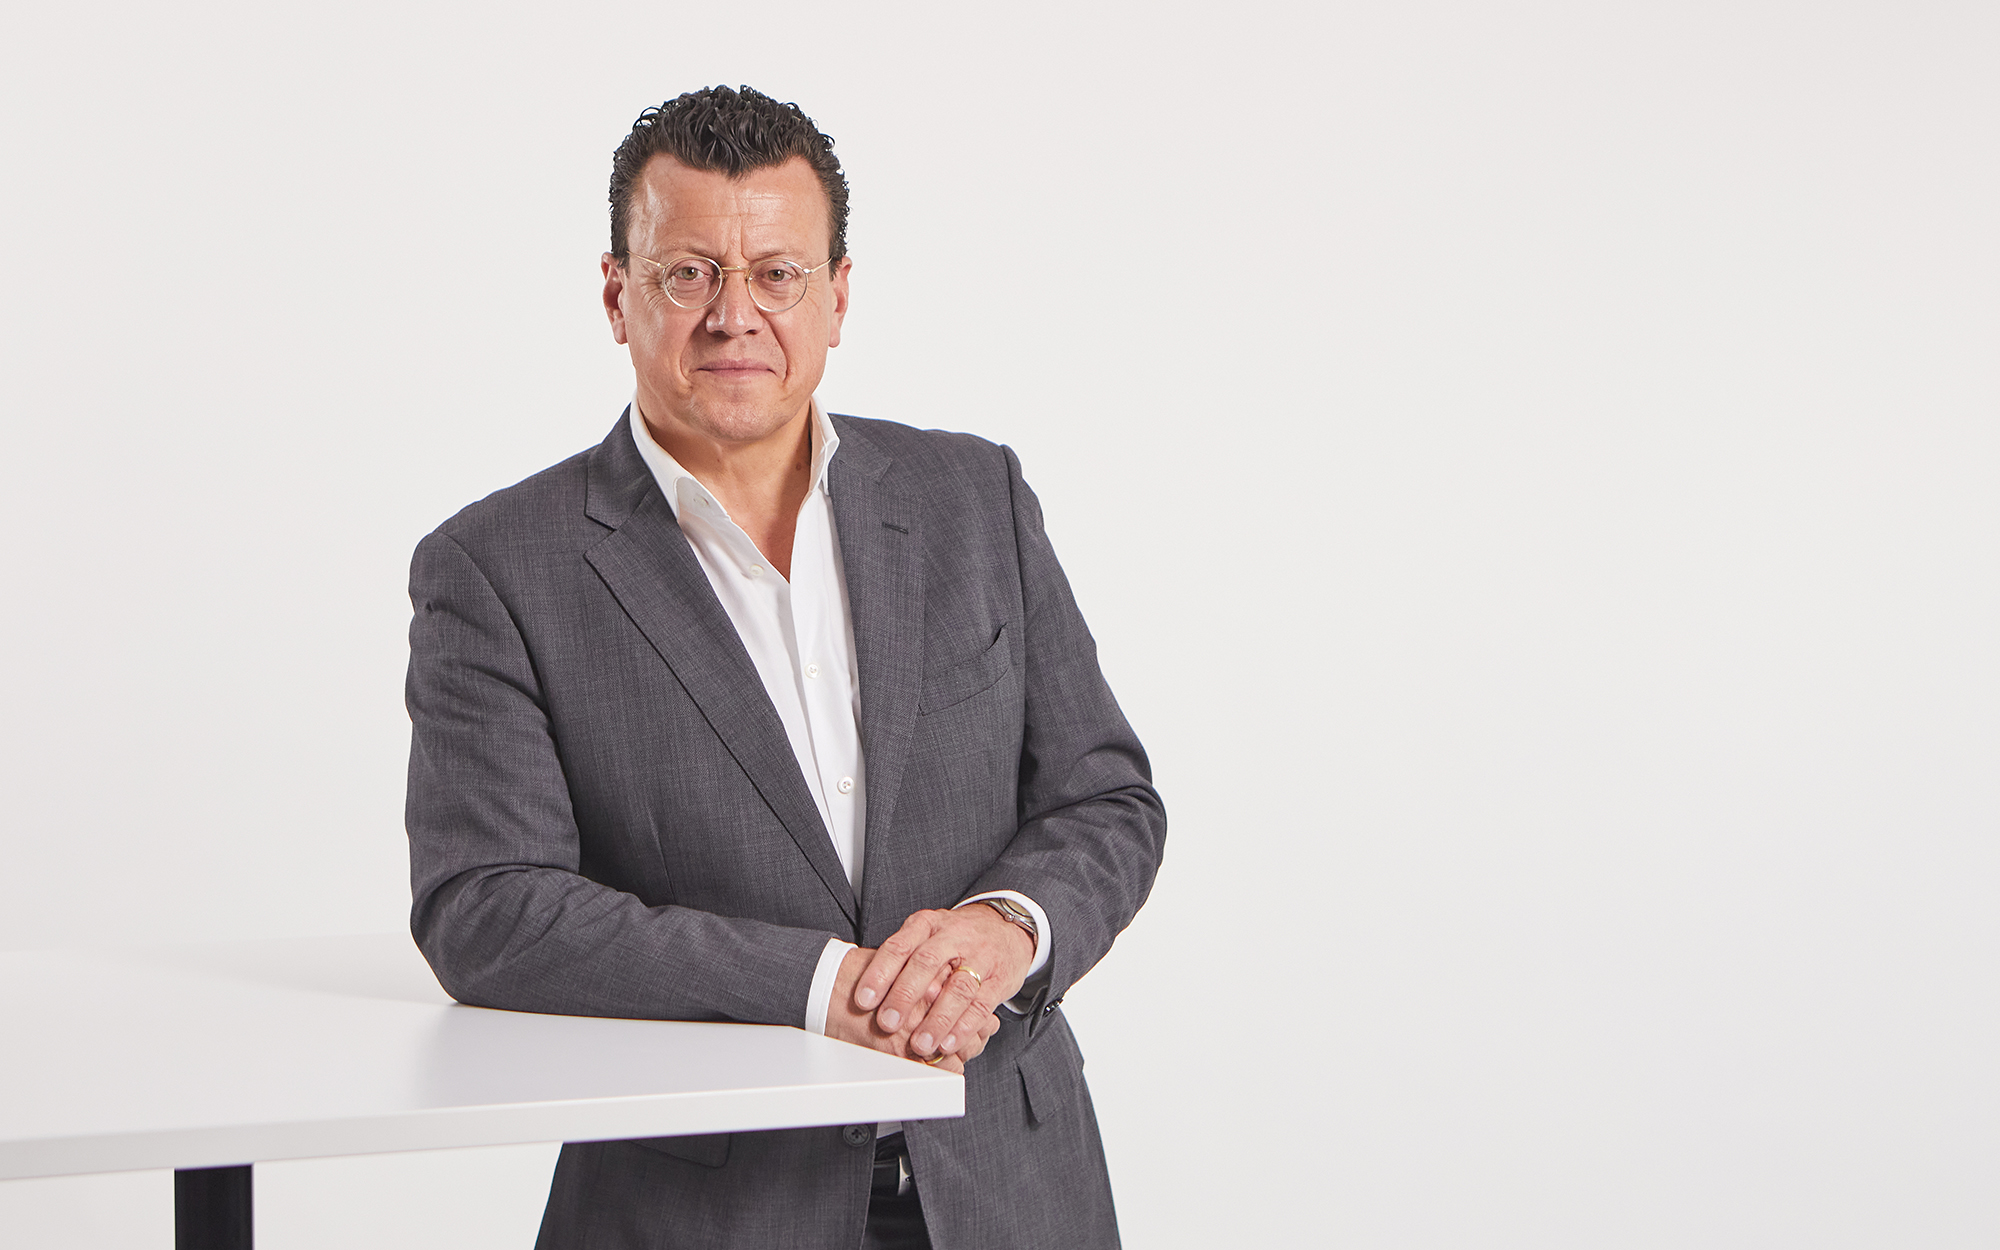 Dr. Steven Althaus has been managing the business of the Grenzebach Group as CEO since 2020. 